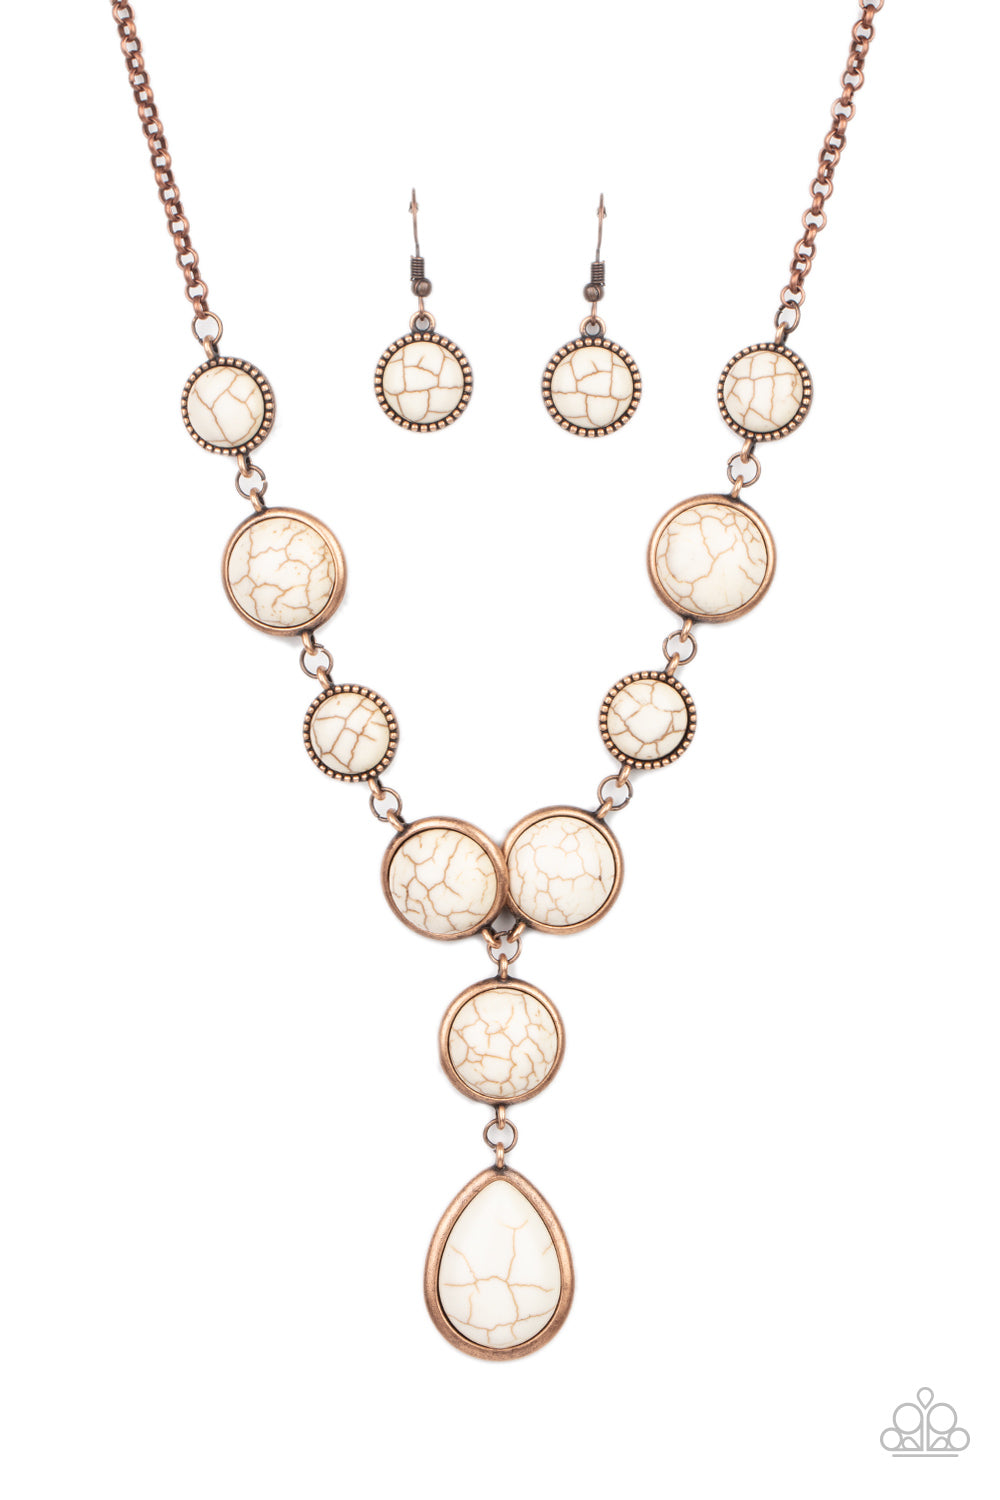 Terrestrial Trailblazer Copper Necklace - Paparazzi Accessories  Featuring studded and plain copper frames, small and large white stones delicately alternate below the collar. A refreshing white stone teardrop frame swings from the bottom of a matching stone frame, creating an earthy extended pendant. Features an adjustable clasp closure.  Includes one pair of matching earrings.  Get The Complete Look! Bracelet: "Turn Up The Terra - White" (Sold Separately)